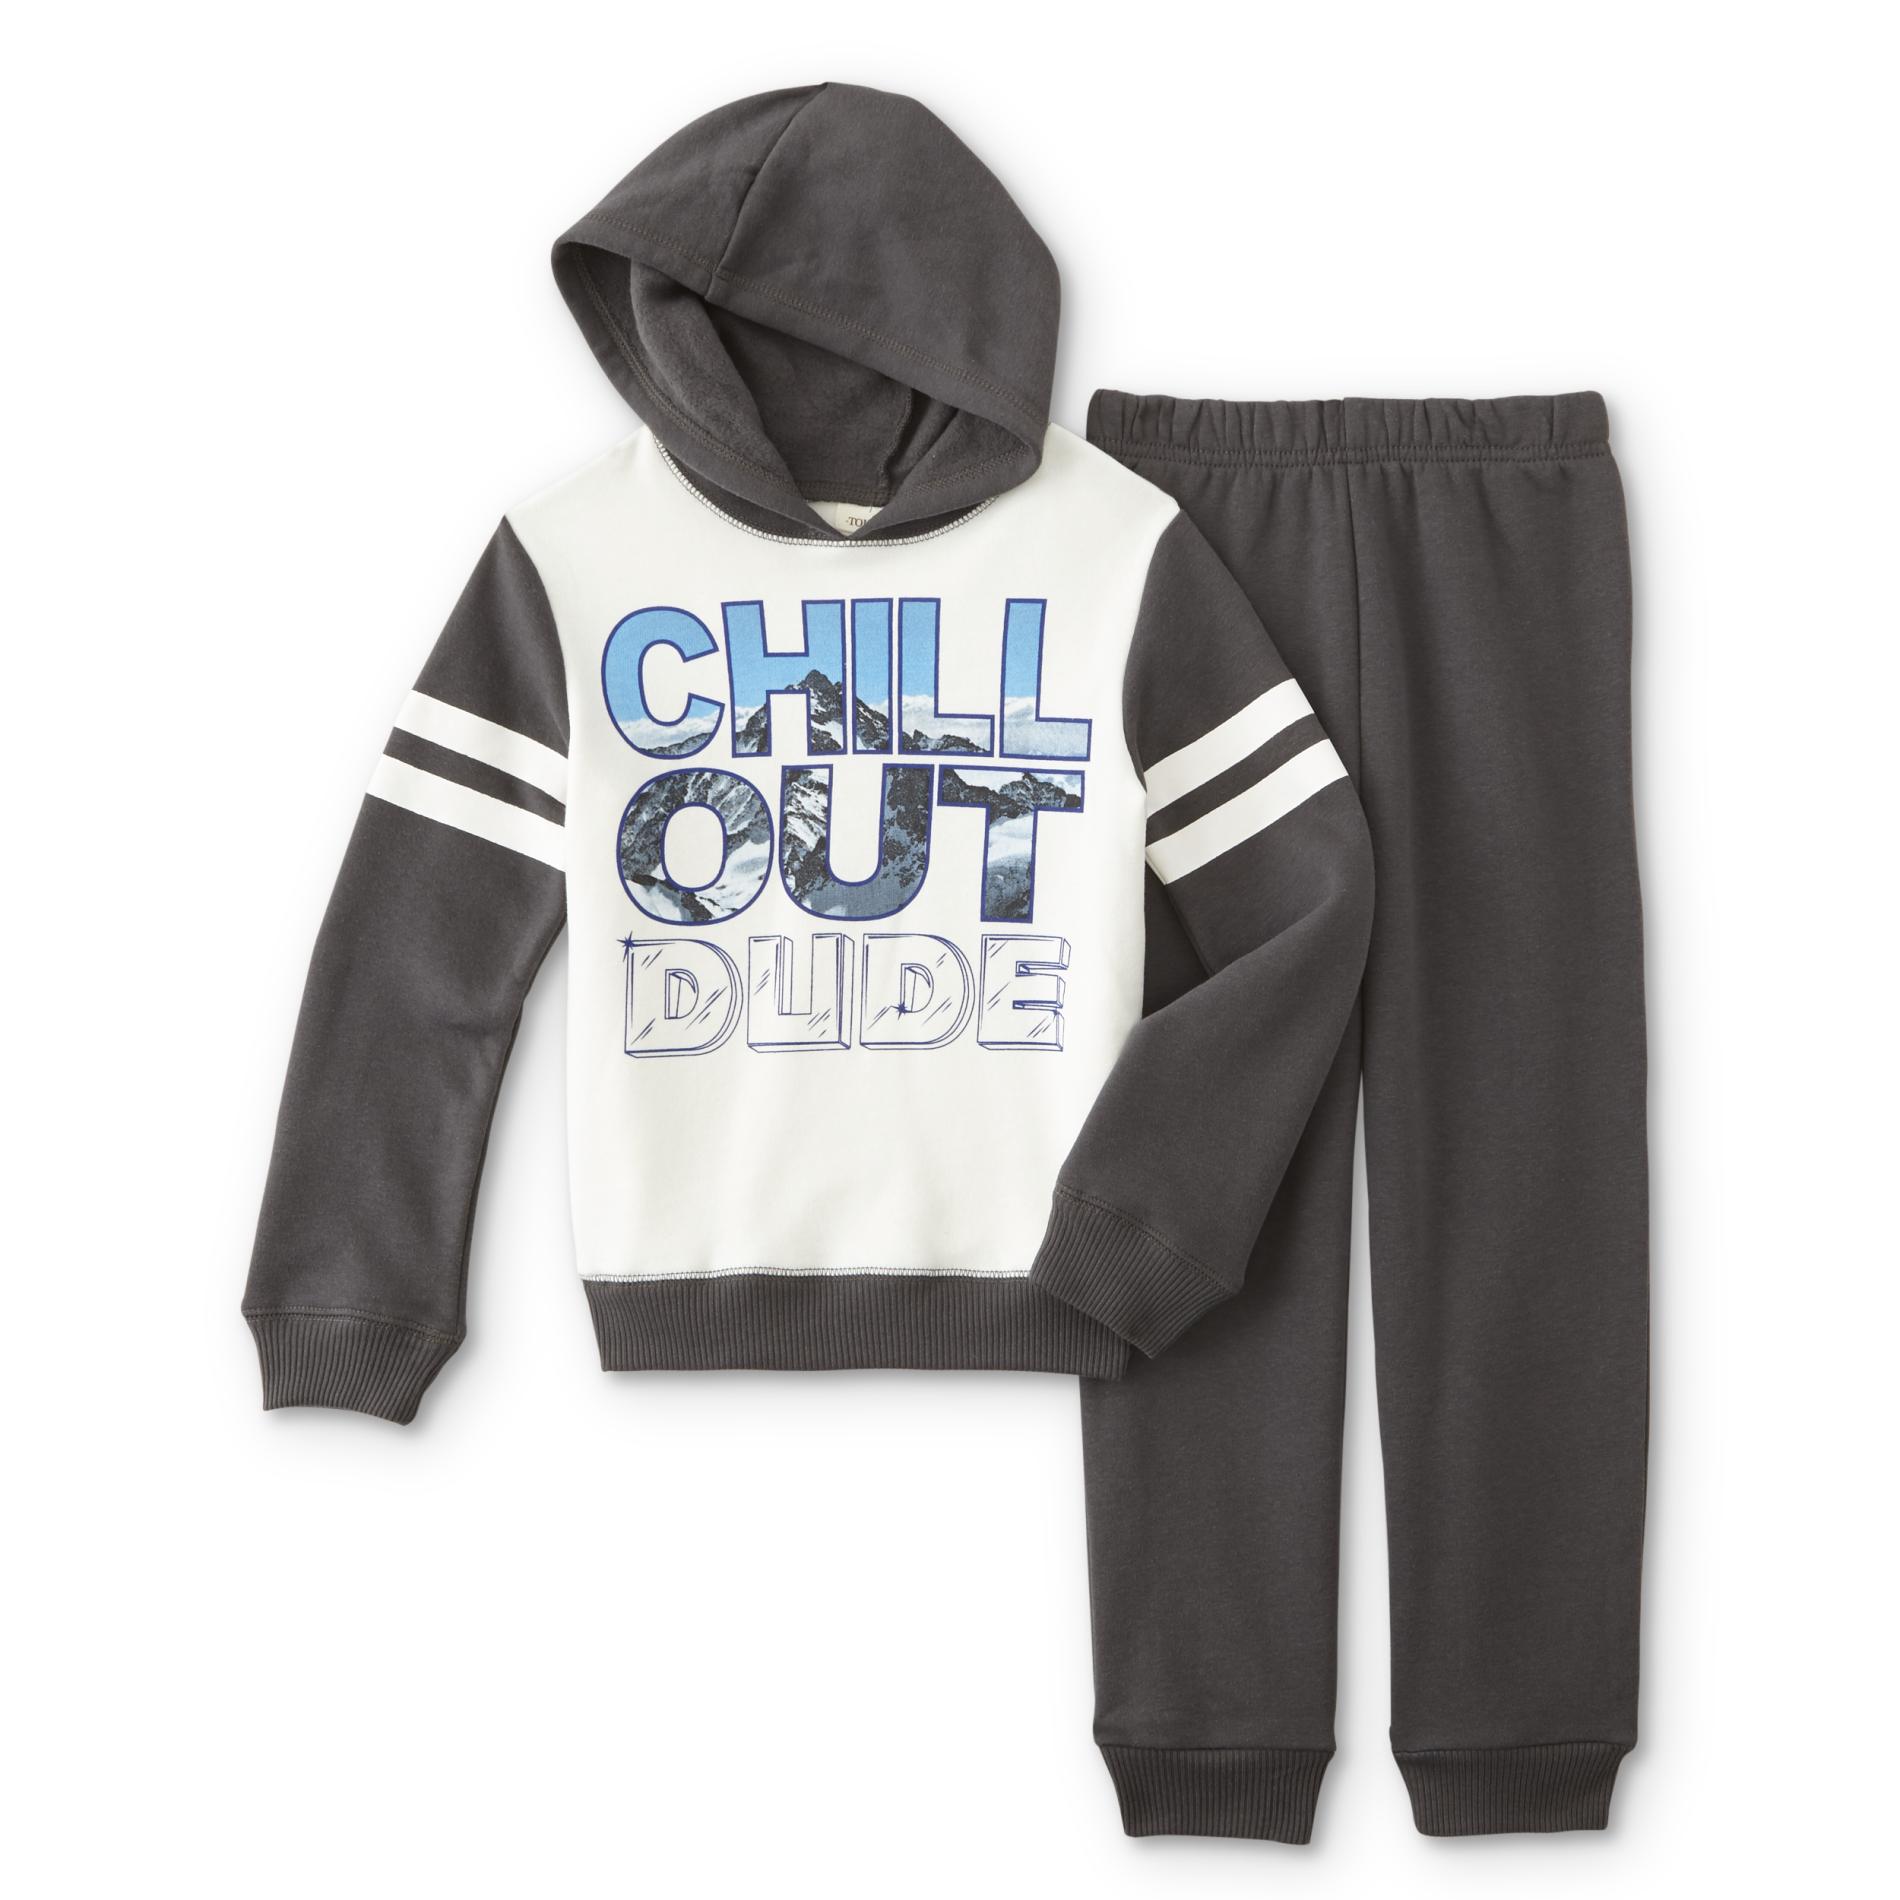 Toughskins Infant & Toddler Boys' Fleece Hoodie & Jogger Pants - Chill Out